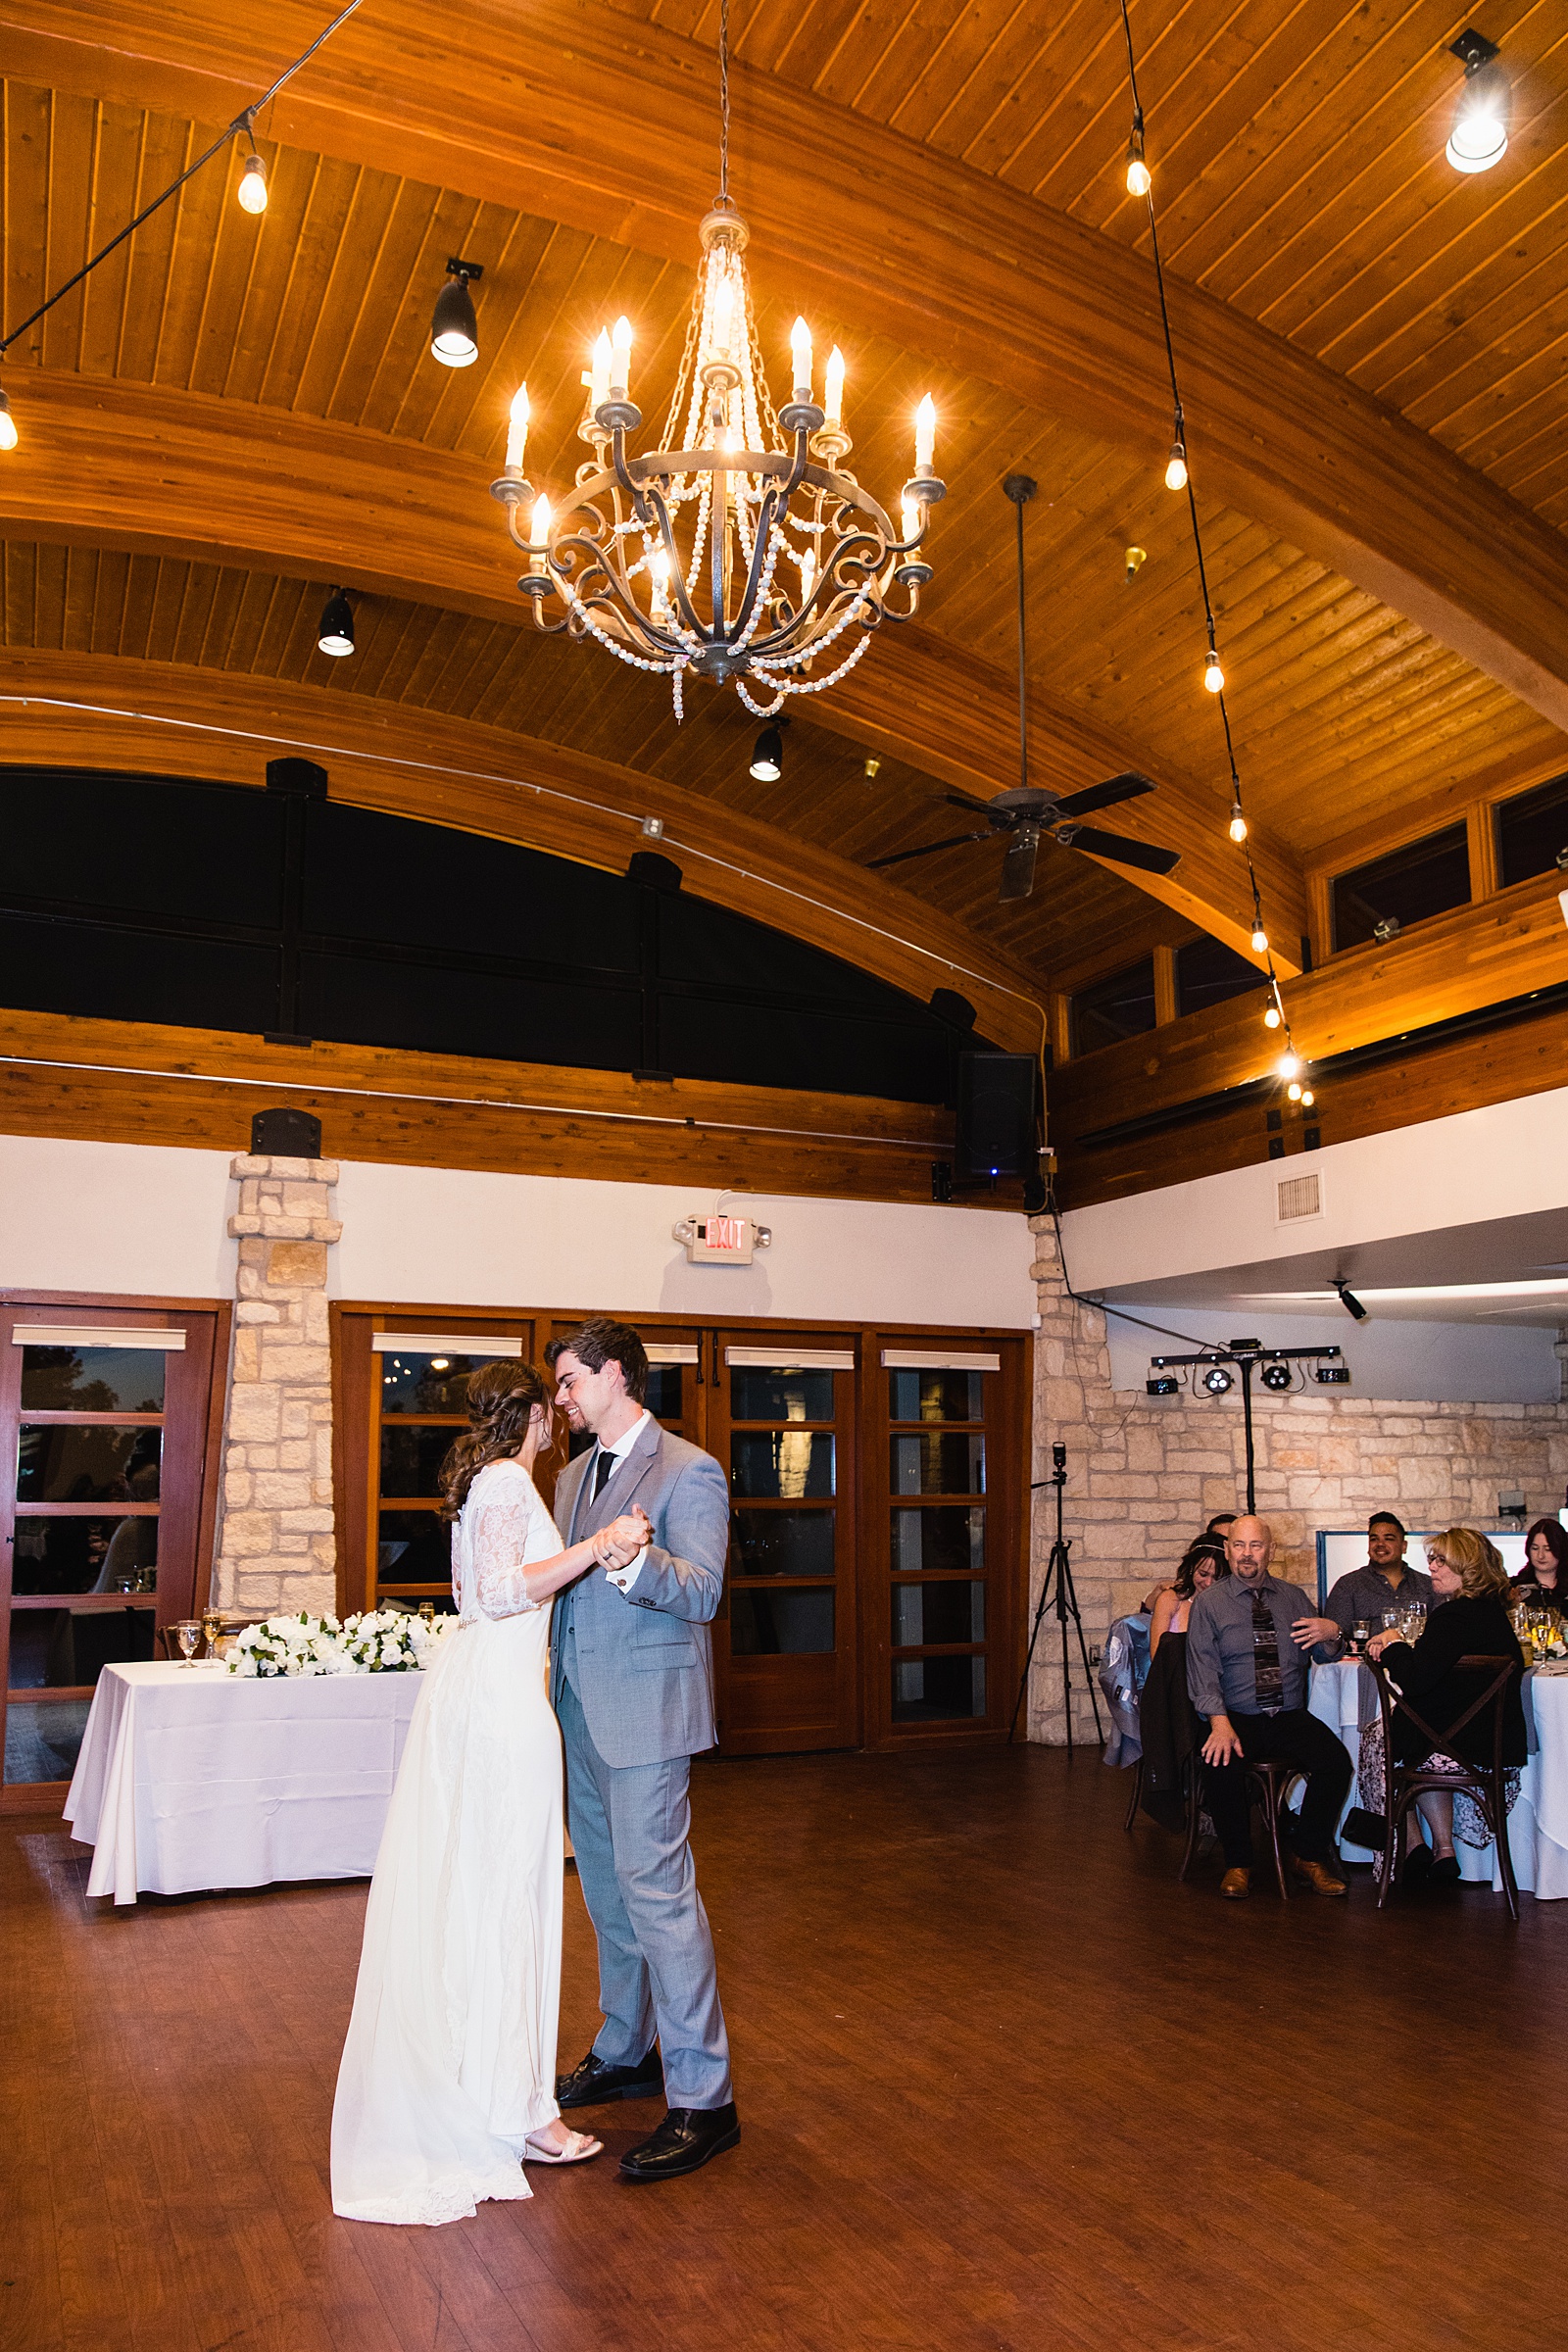 Newlyweds sharing first dance at their Ocotillo Oasis wedding reception by Arizona wedding photographer PMA Photography.